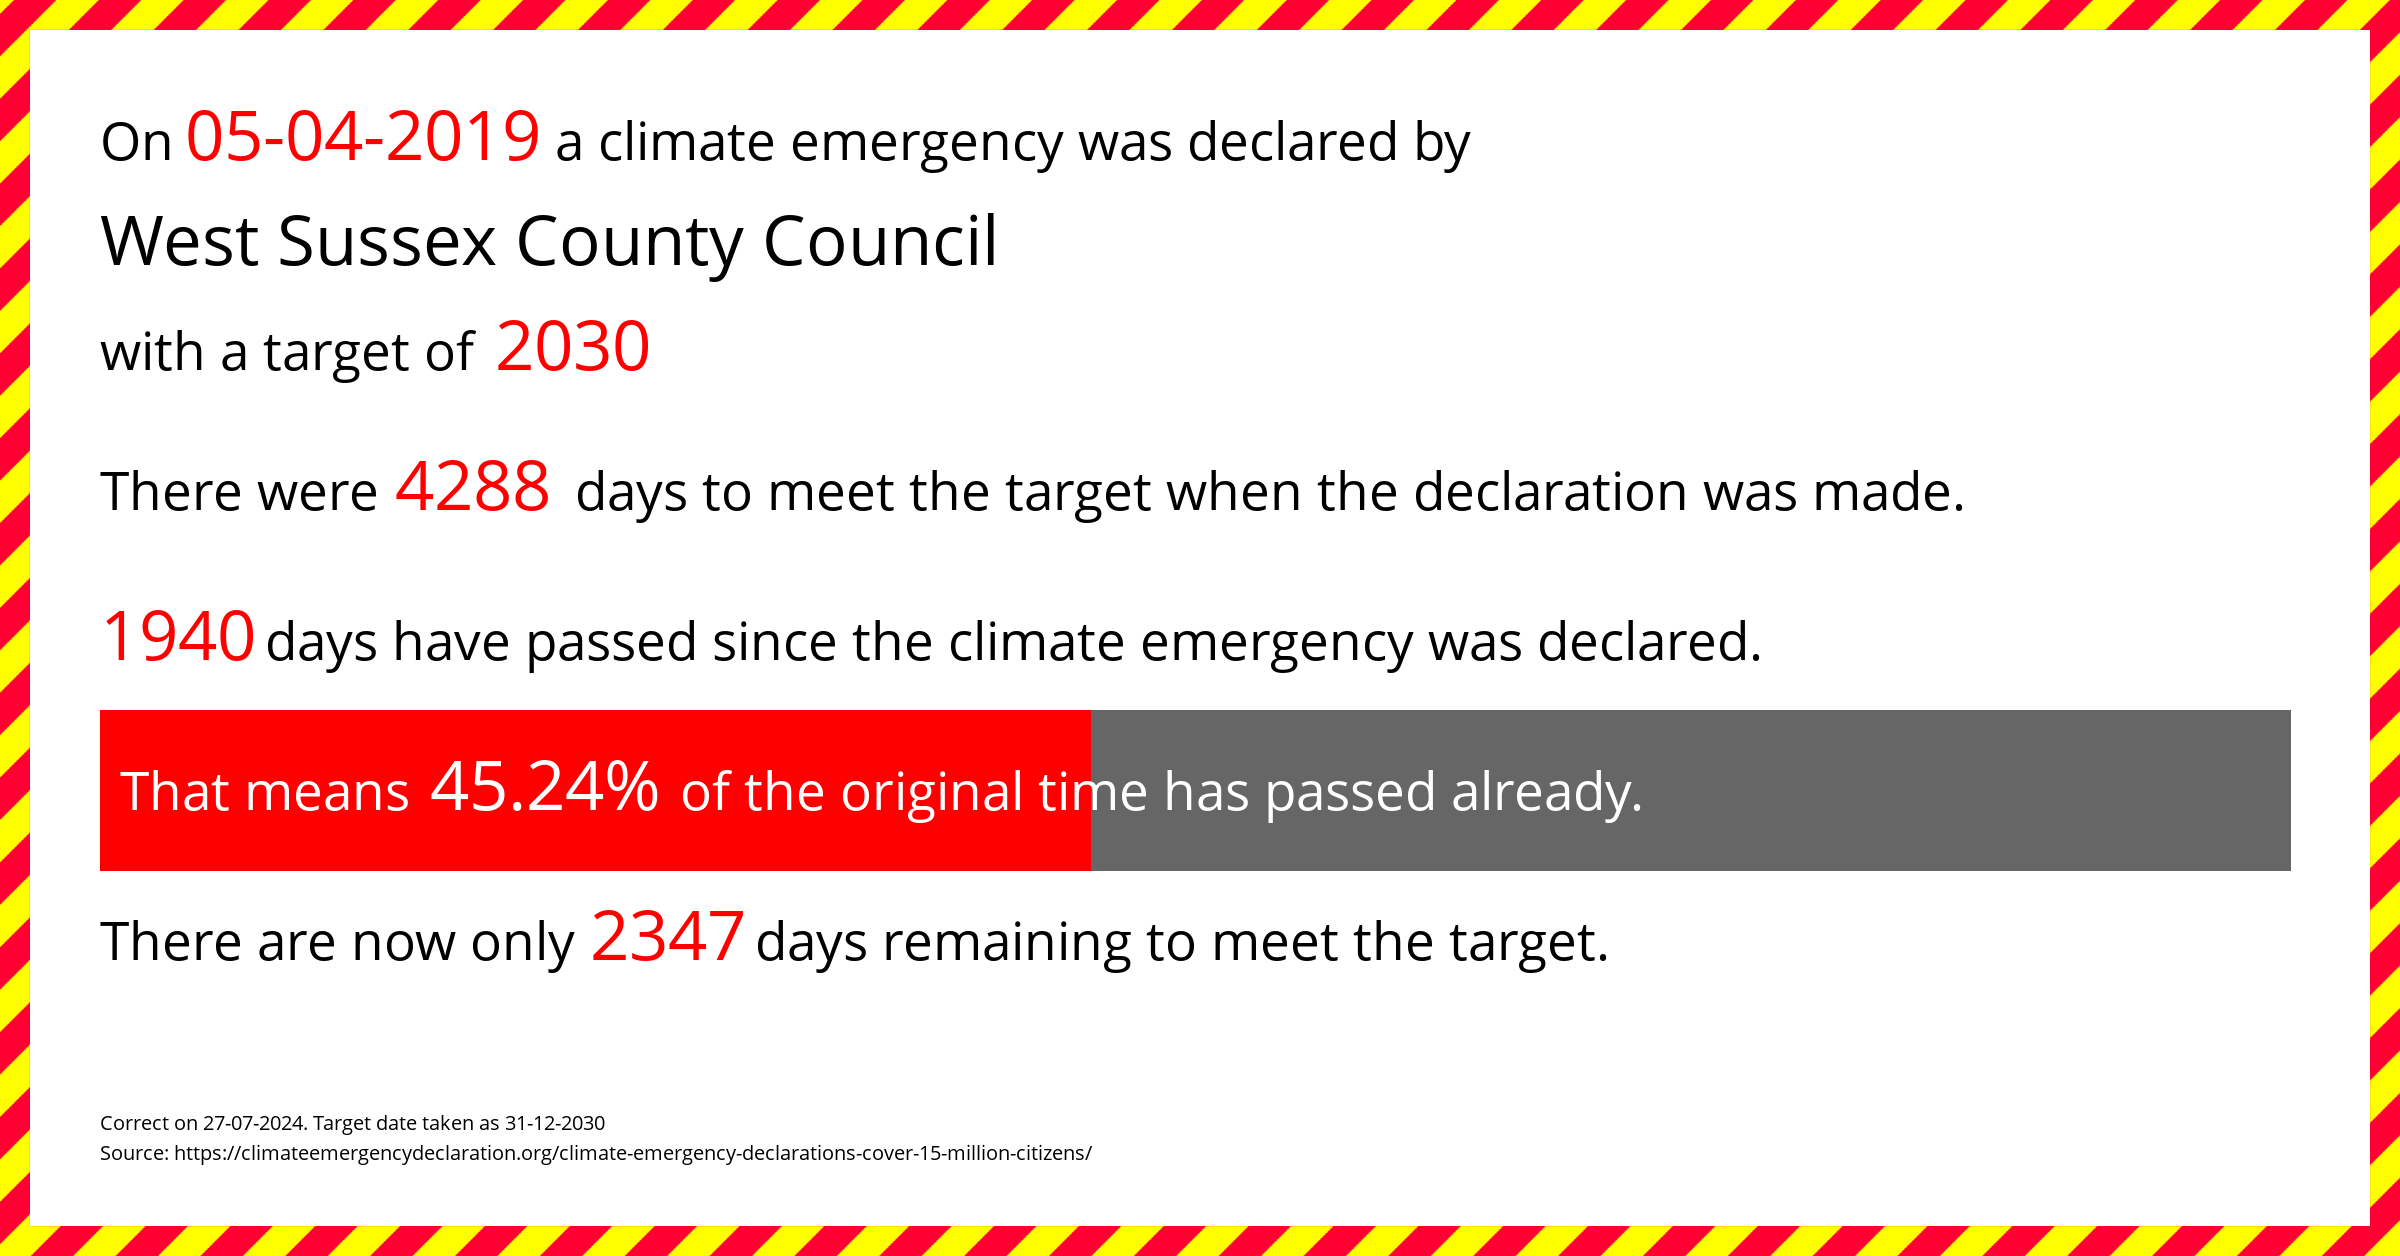 West Sussex County Council declared a Climate emergency on Friday 5th April 2019, with a target of 2030.